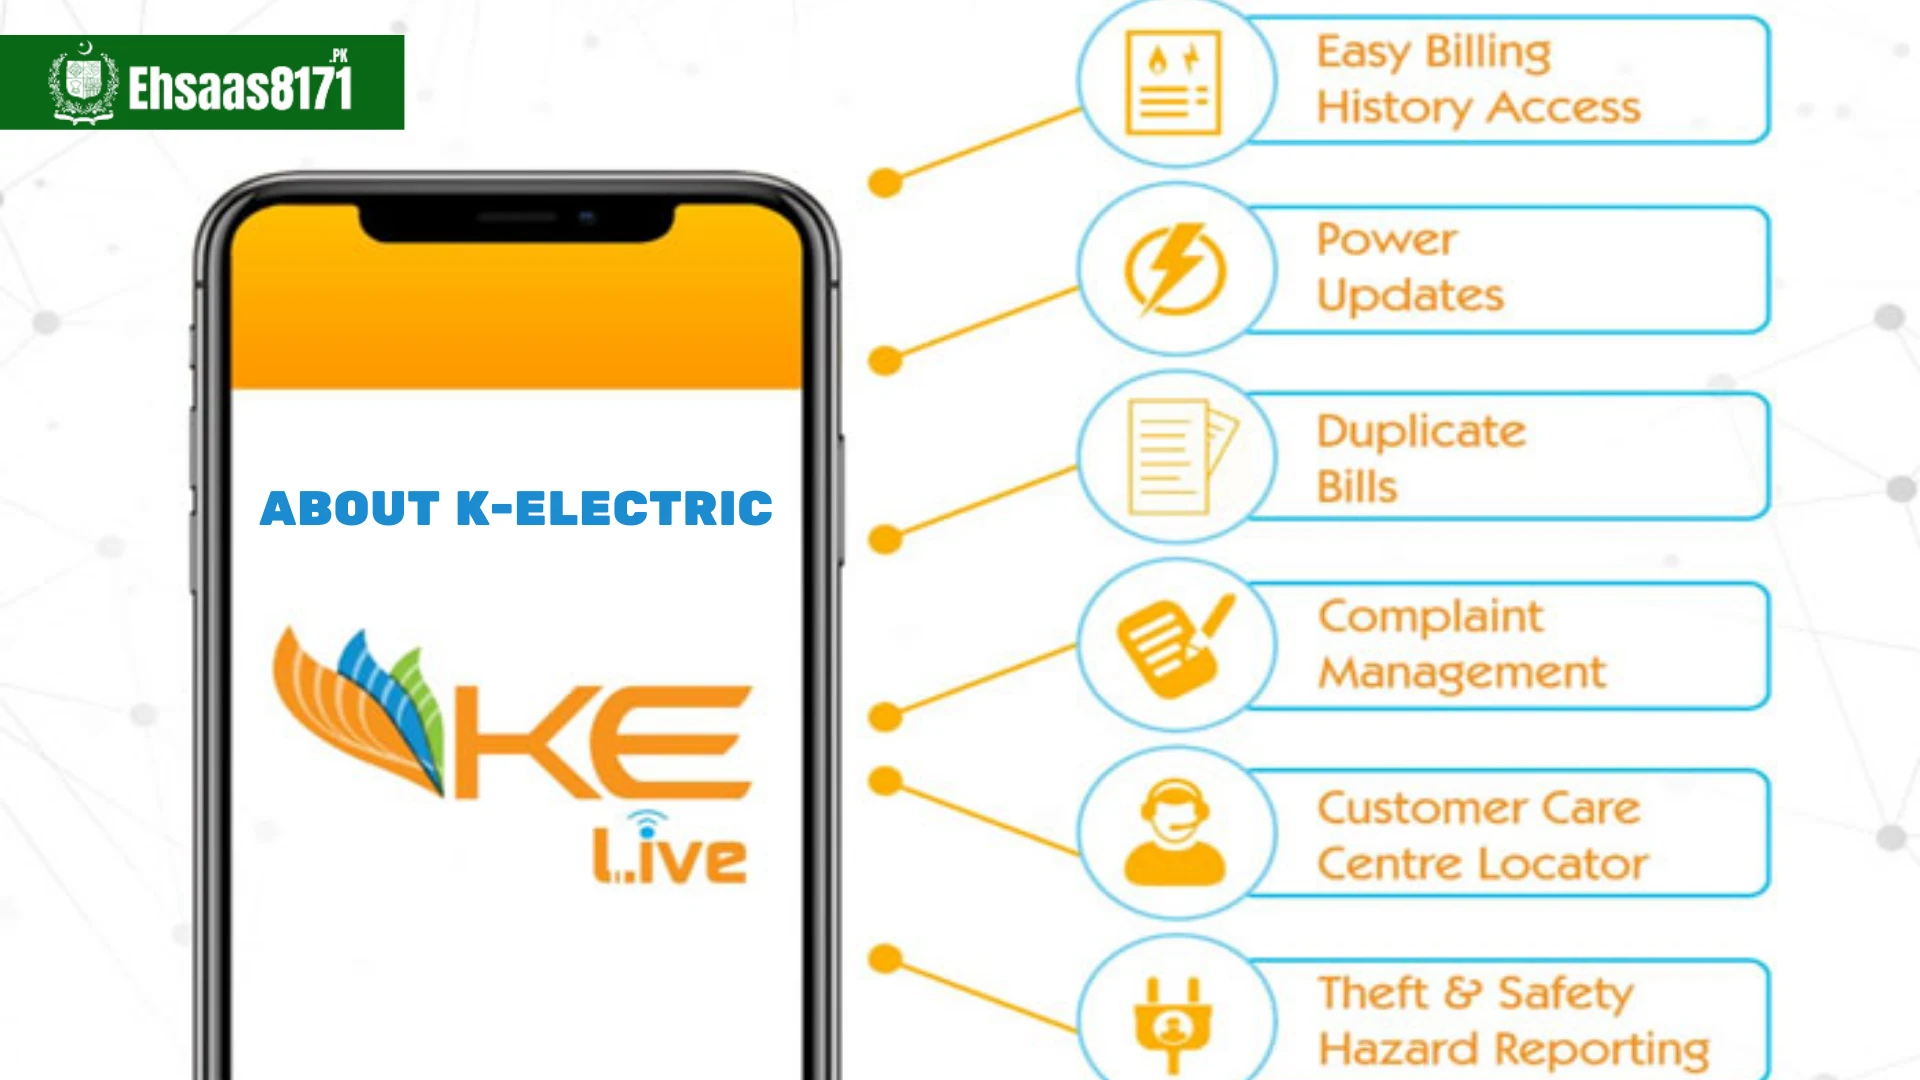 About K-Electric